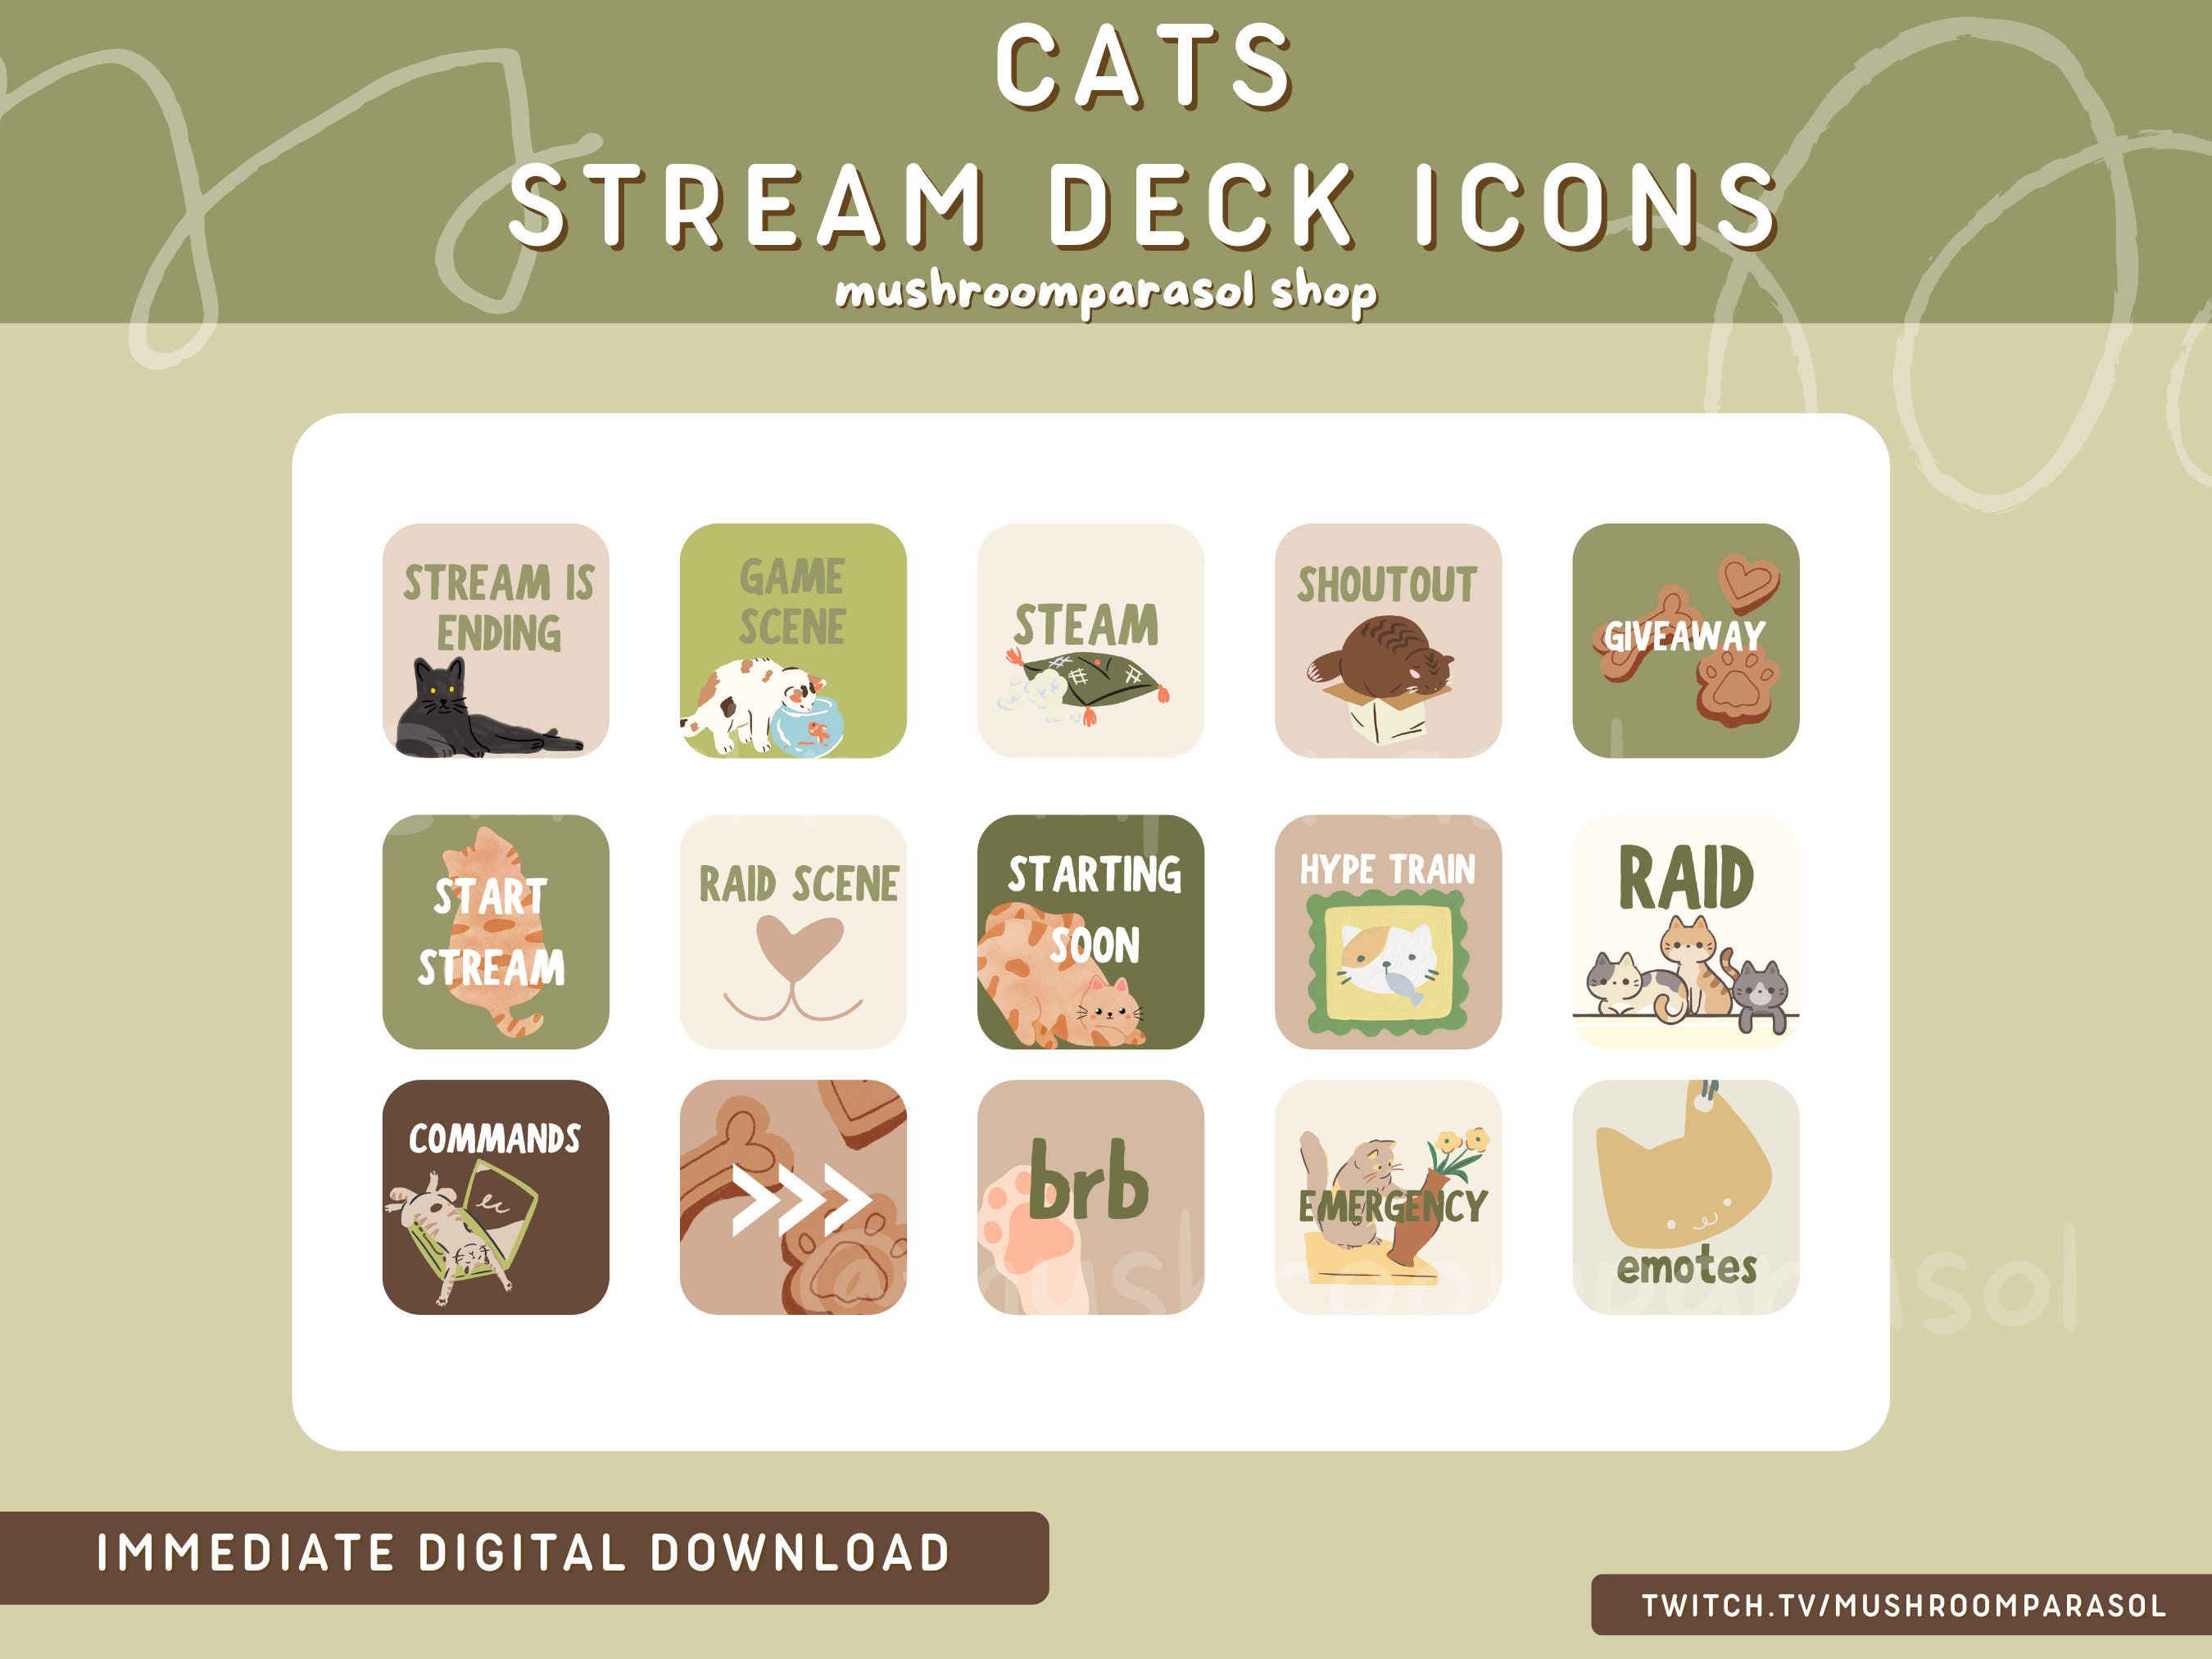 cats icons, aesthetic and cat icons - image #7690580 on